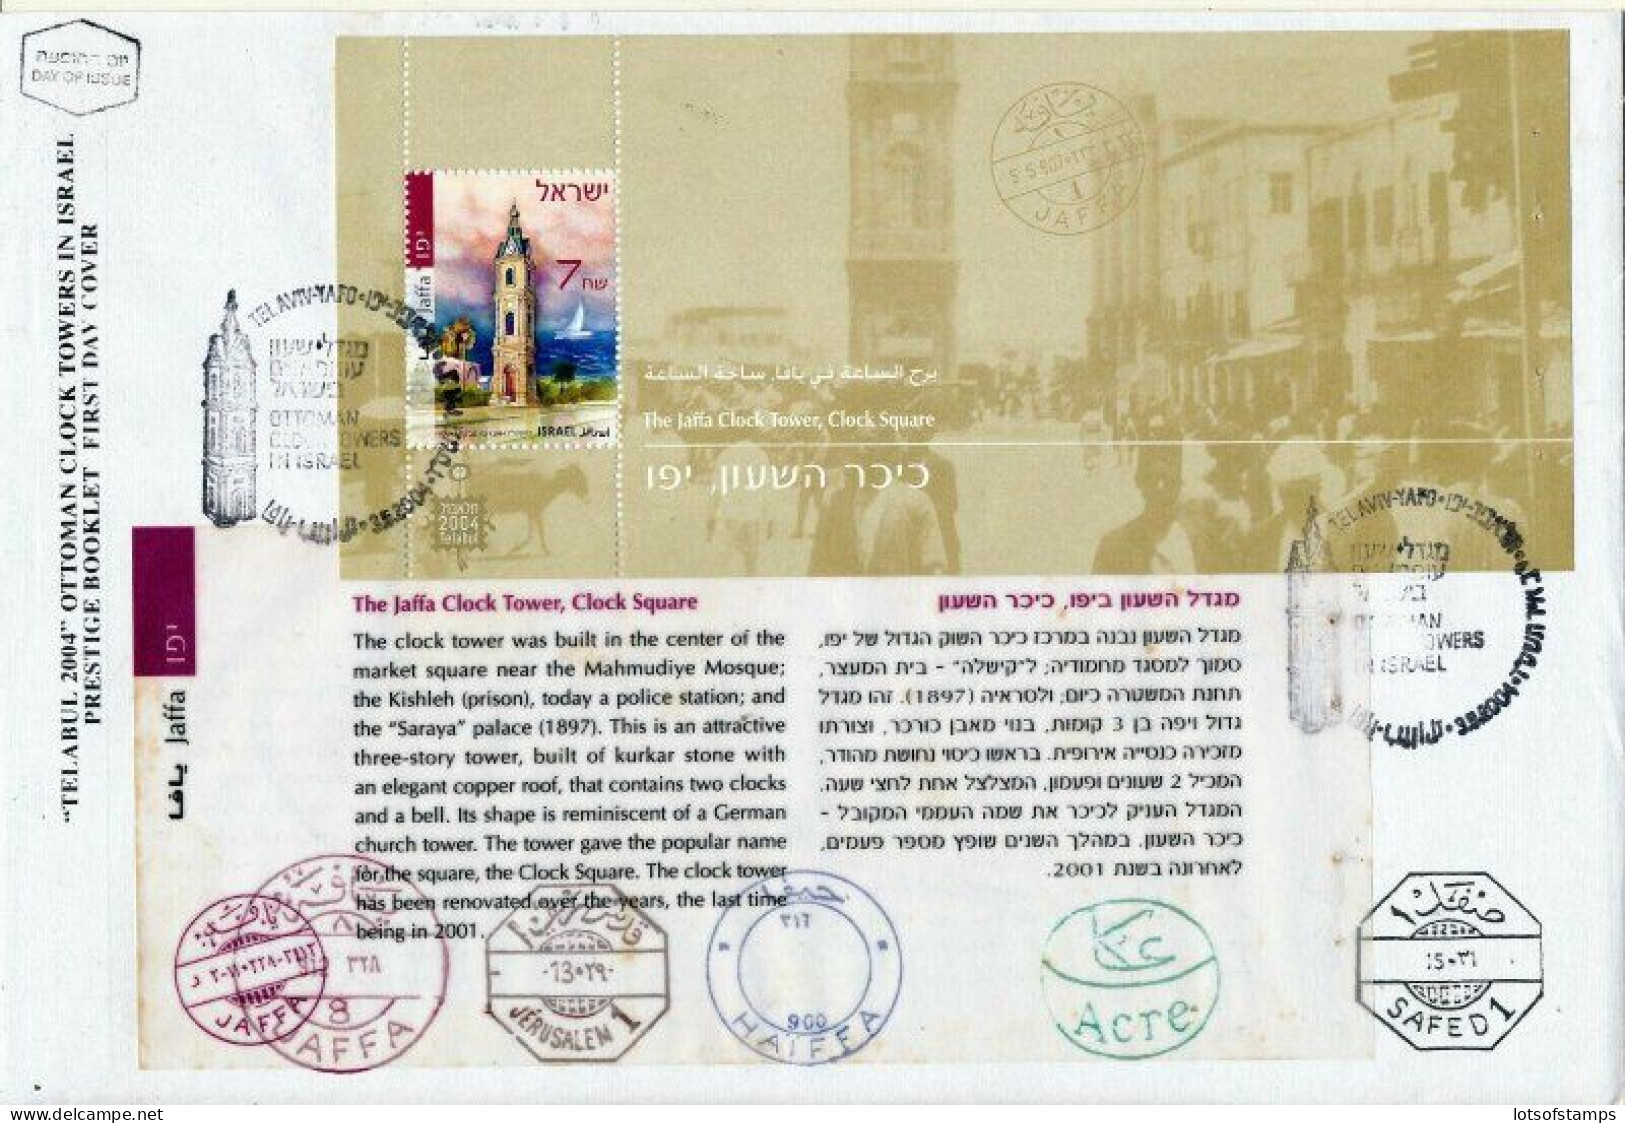 ISRAEL 2004 ANCIENT CLOCK TOWERS BOOKLET S/SHEETS SET OF 6 FDC's SEE 6 SCANS - Briefe U. Dokumente